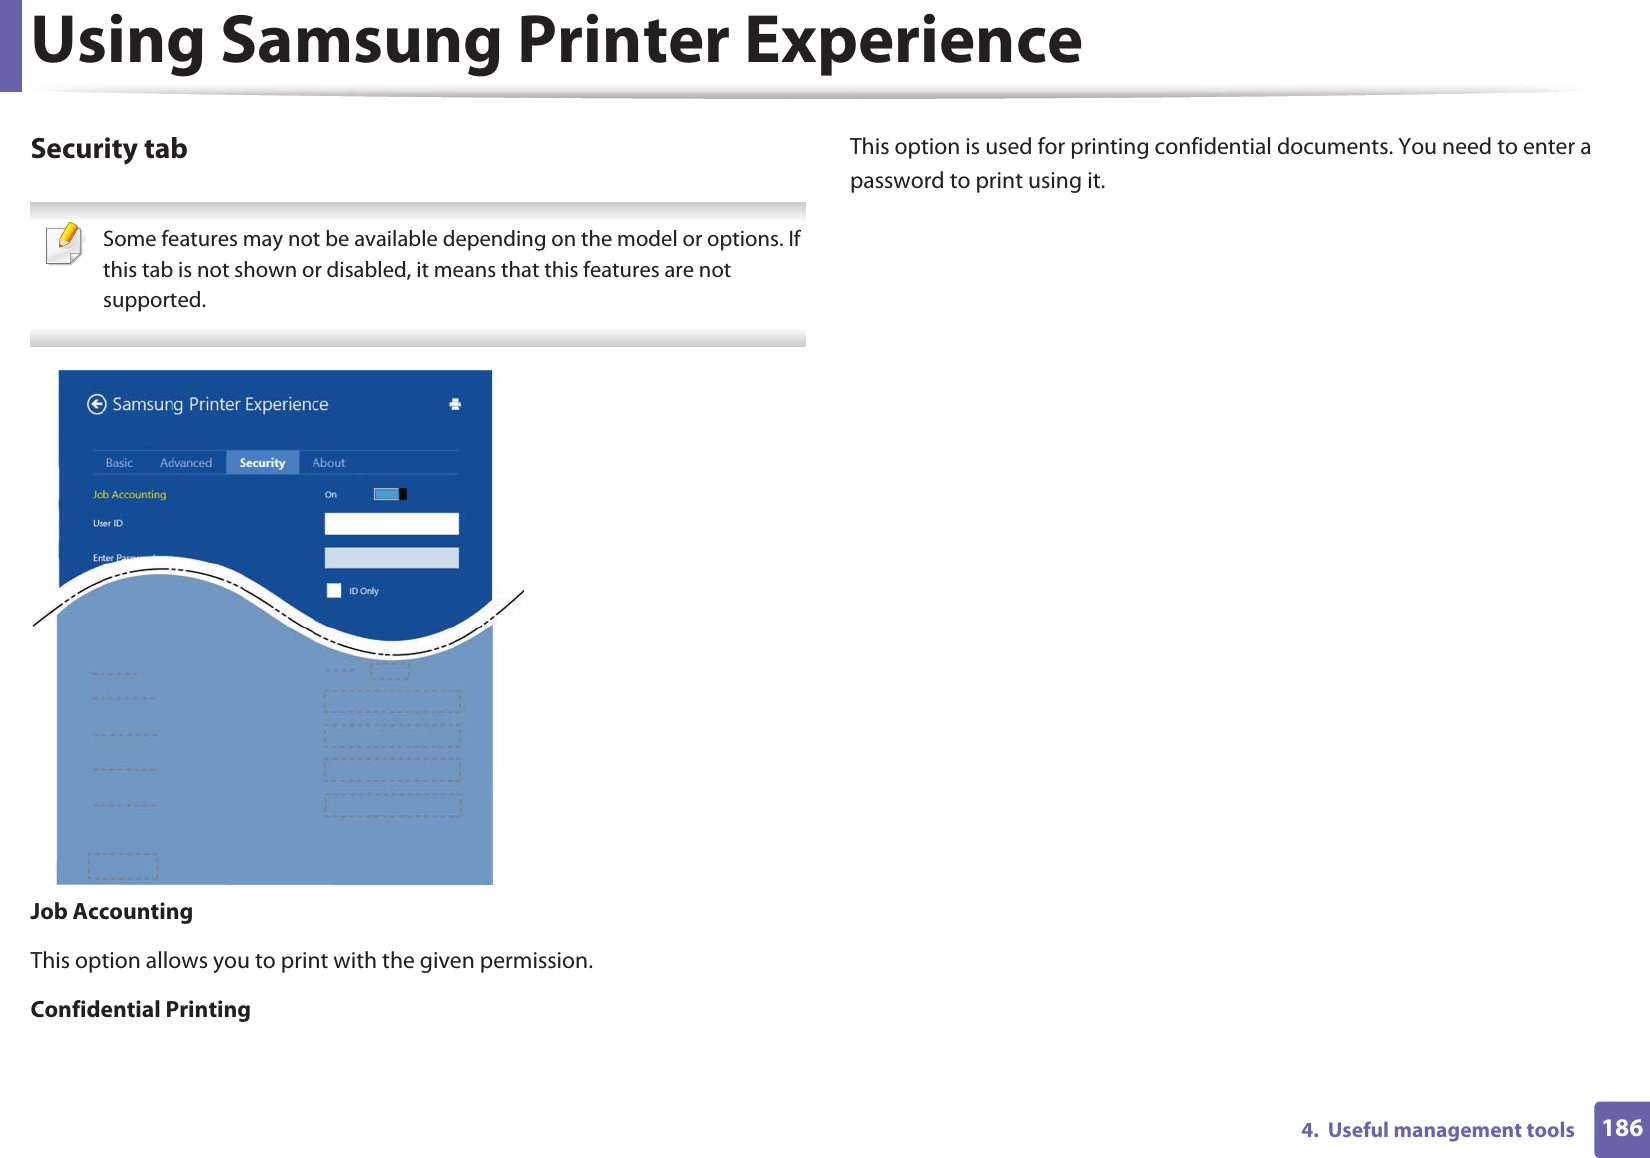 Using Samsung Printer Experience1864.  Useful management toolsSecurity tab Some features may not be available depending on the model or options. If this tab is not shown or disabled, it means that this features are not supported. Job AccountingThis option allows you to print with the given permission.Confidential PrintingThis option is used for printing confidential documents. You need to enter a password to print using it.